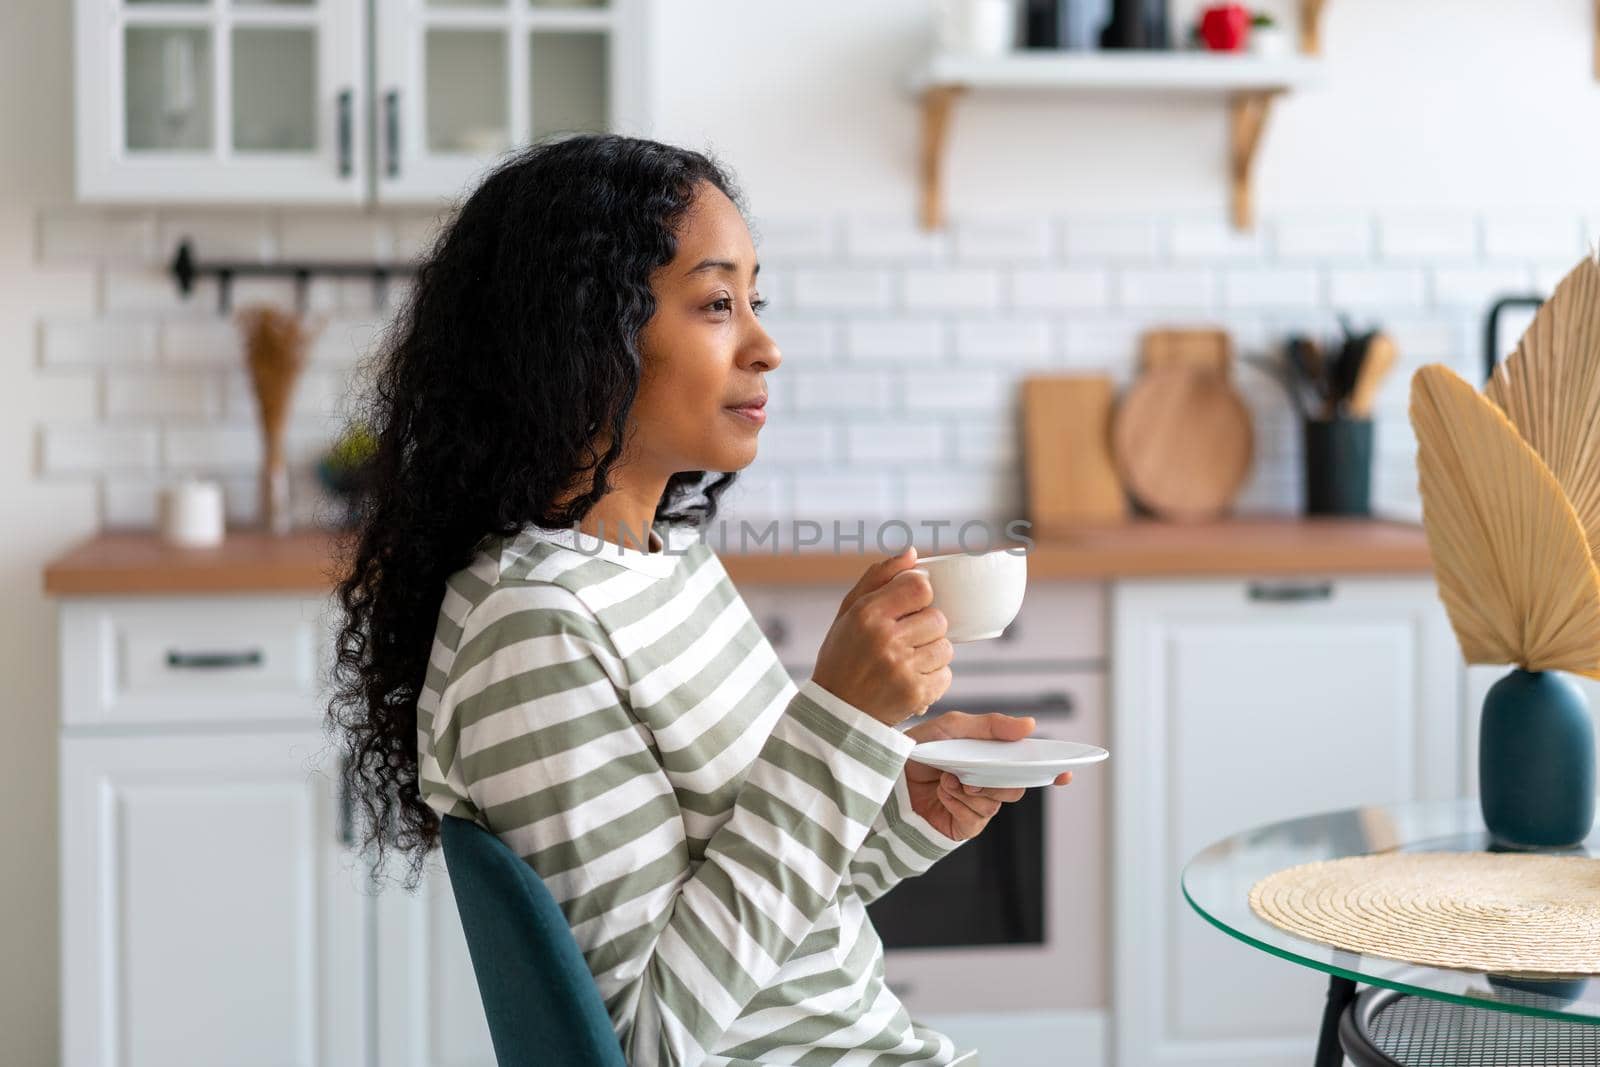 African-american woman drinking cup of coffee in the morning for breakfast. Concept of niksen lifestyle and slow-living. Modern white kitchen on background. Small break, micro-moment